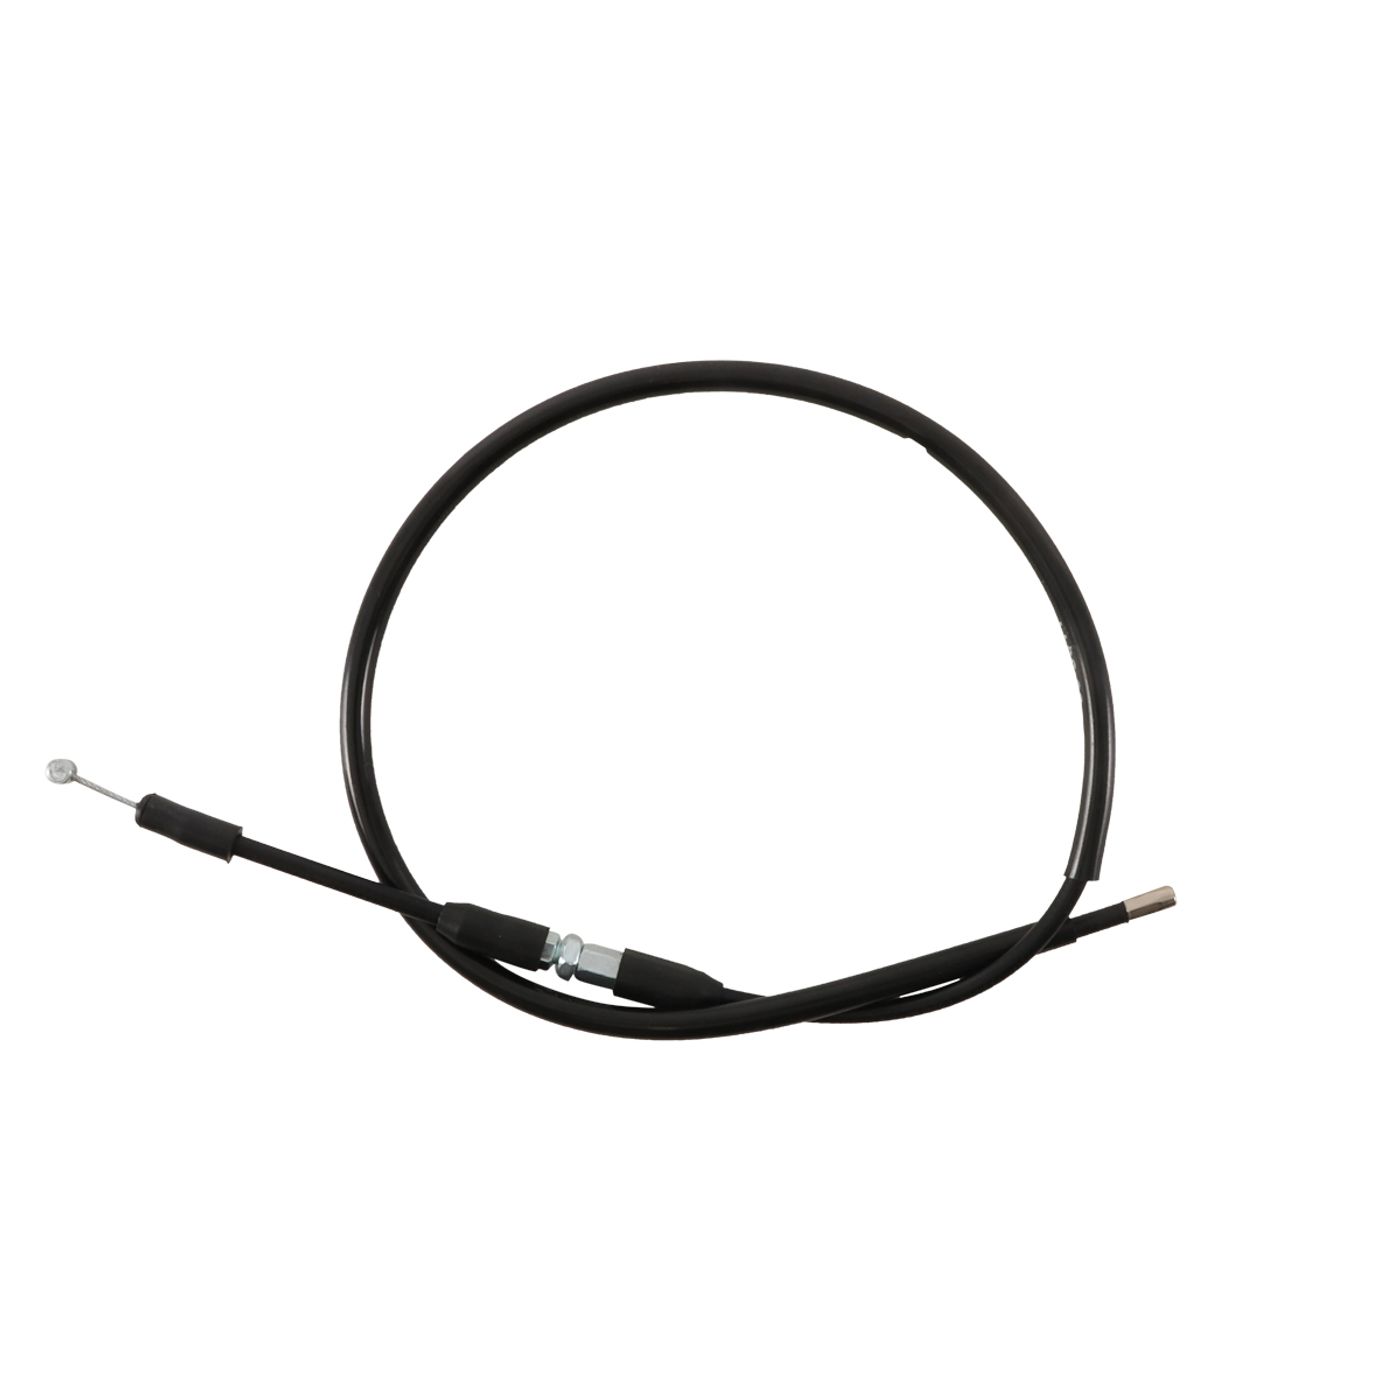 Wrp Clutch Cables - WRP453002 image